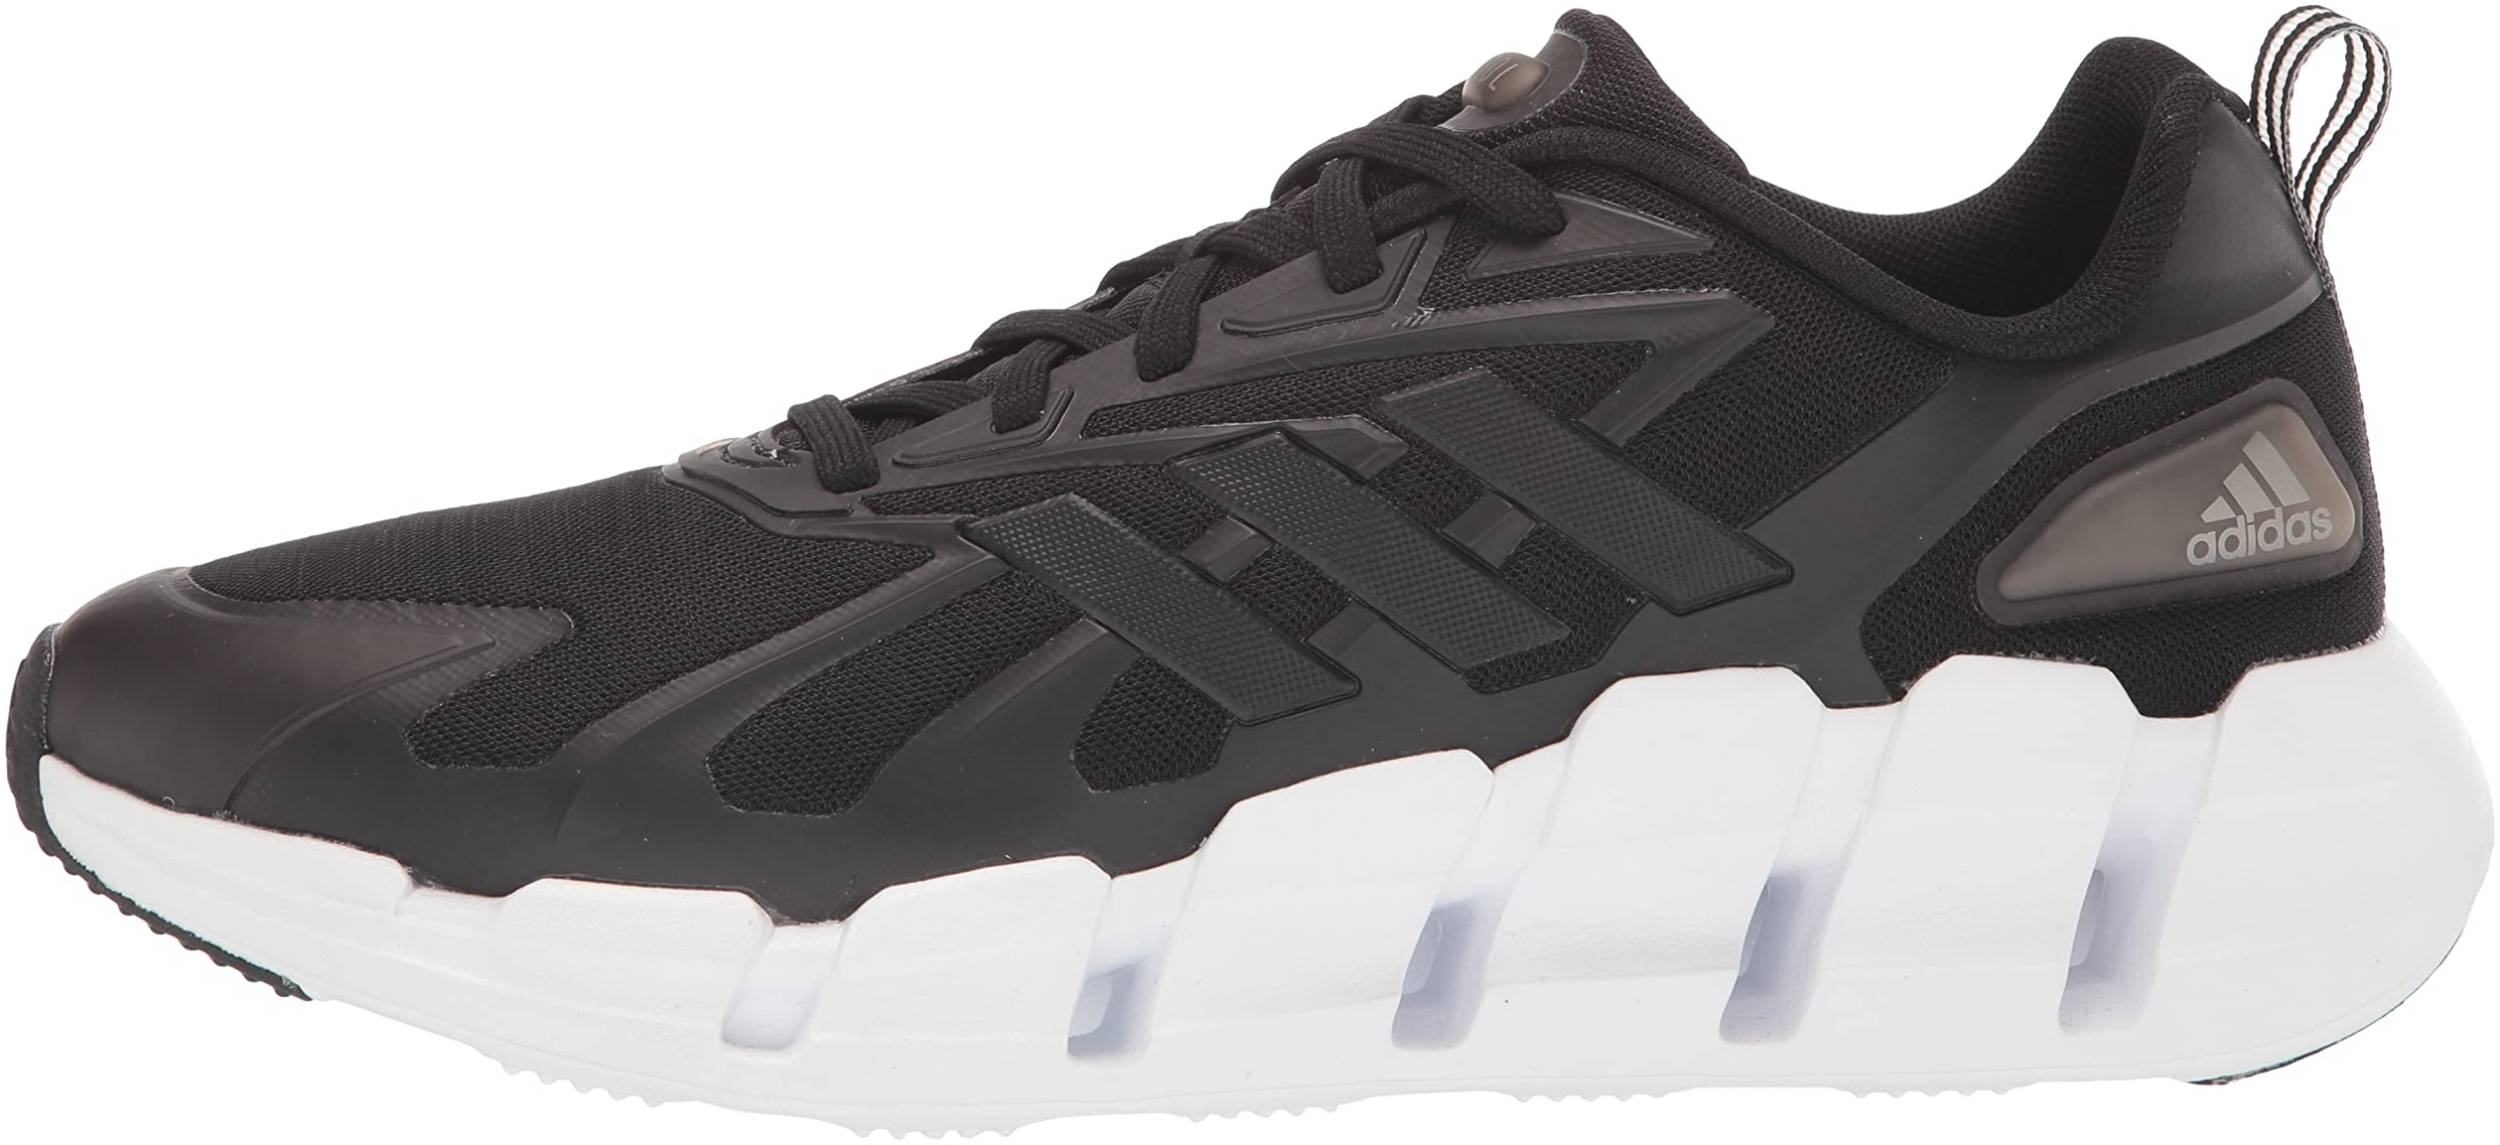 Adidas Climacool sneakers black + white (only $40) |